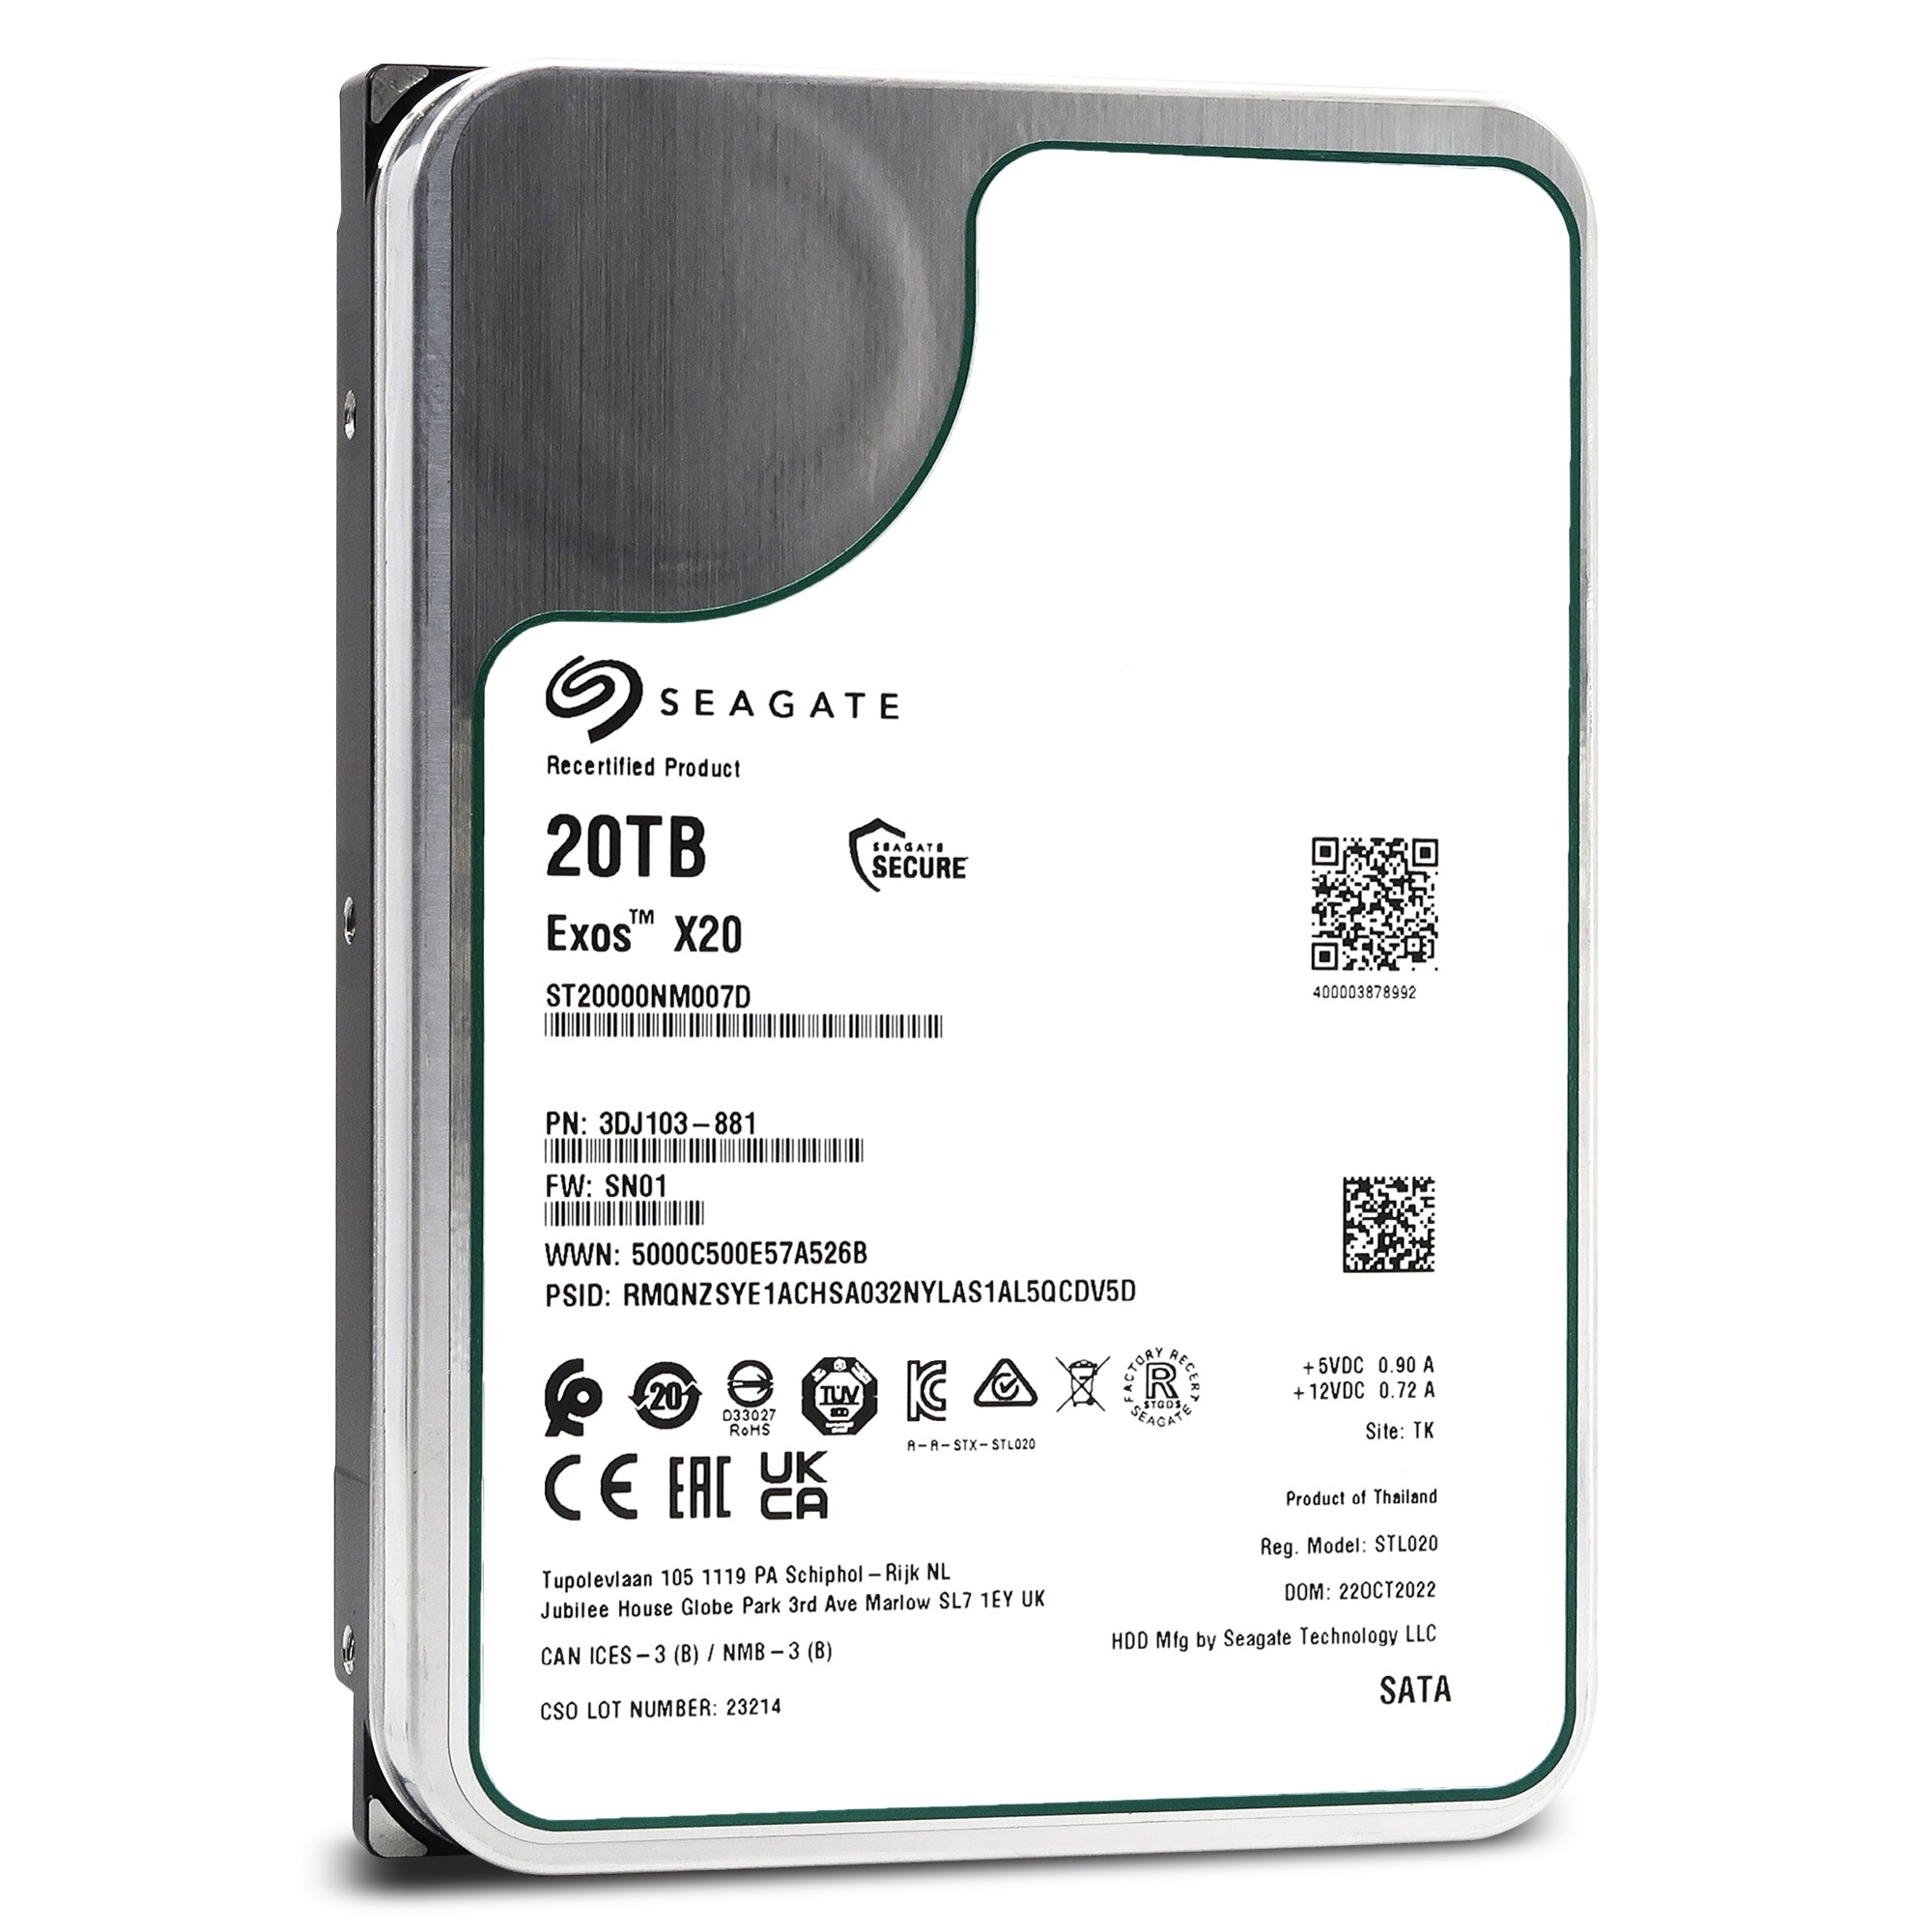 Seagate Exos X20 ST20000NM007D 20TB 7.2K RPM SATA 6Gb/s 3.5in Recertified Hard Drive - Front View